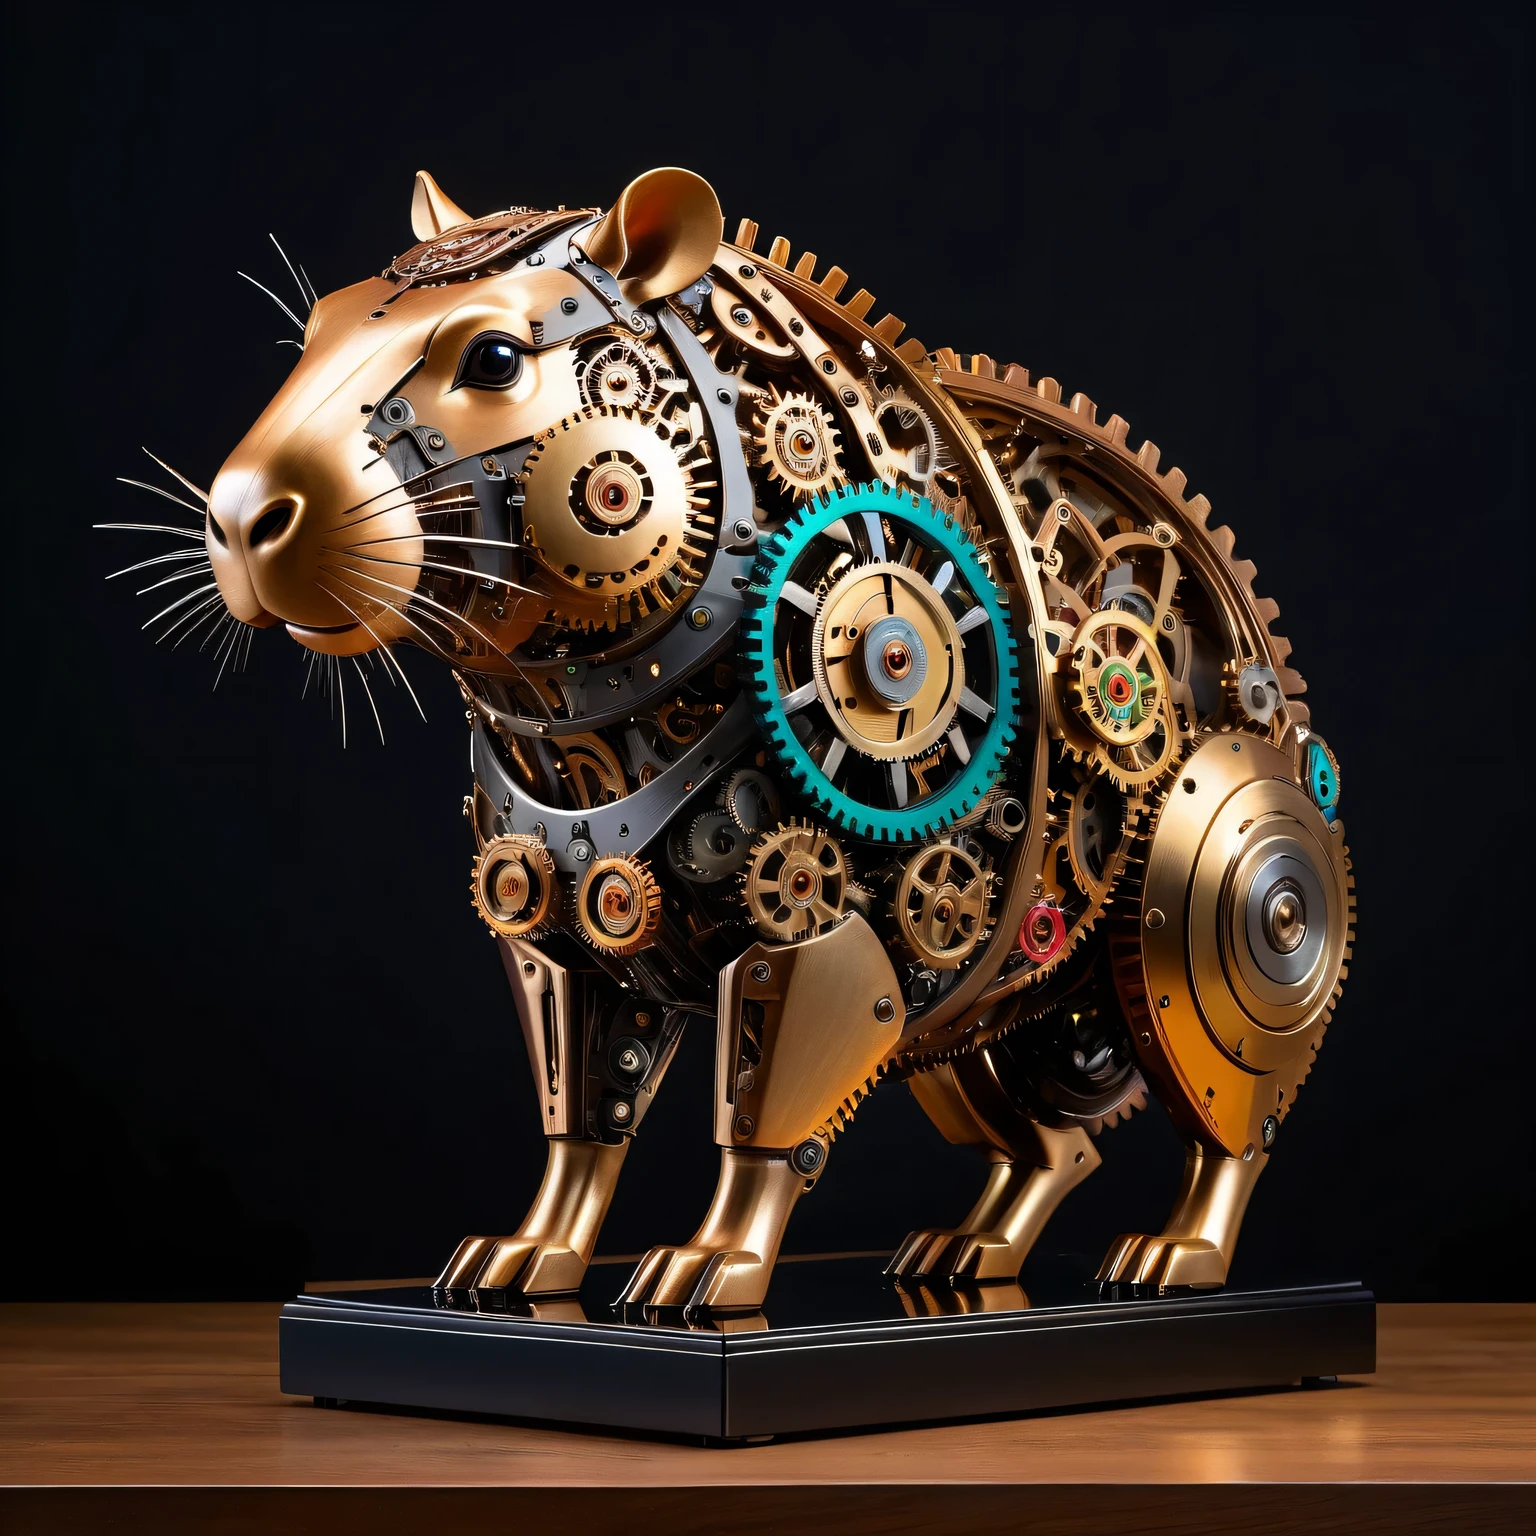 best quality,ultra-detailed,realistic,mechanical,robotic,Capybara sculpture,detailed gears and cogs,stainless steel,moving parts,industrial aesthetic,machinery,steampunk,shiny metallic surface,sharp edges and angles,bright studio lighting,colorful LED lights,mechanical movements,clockwork precision